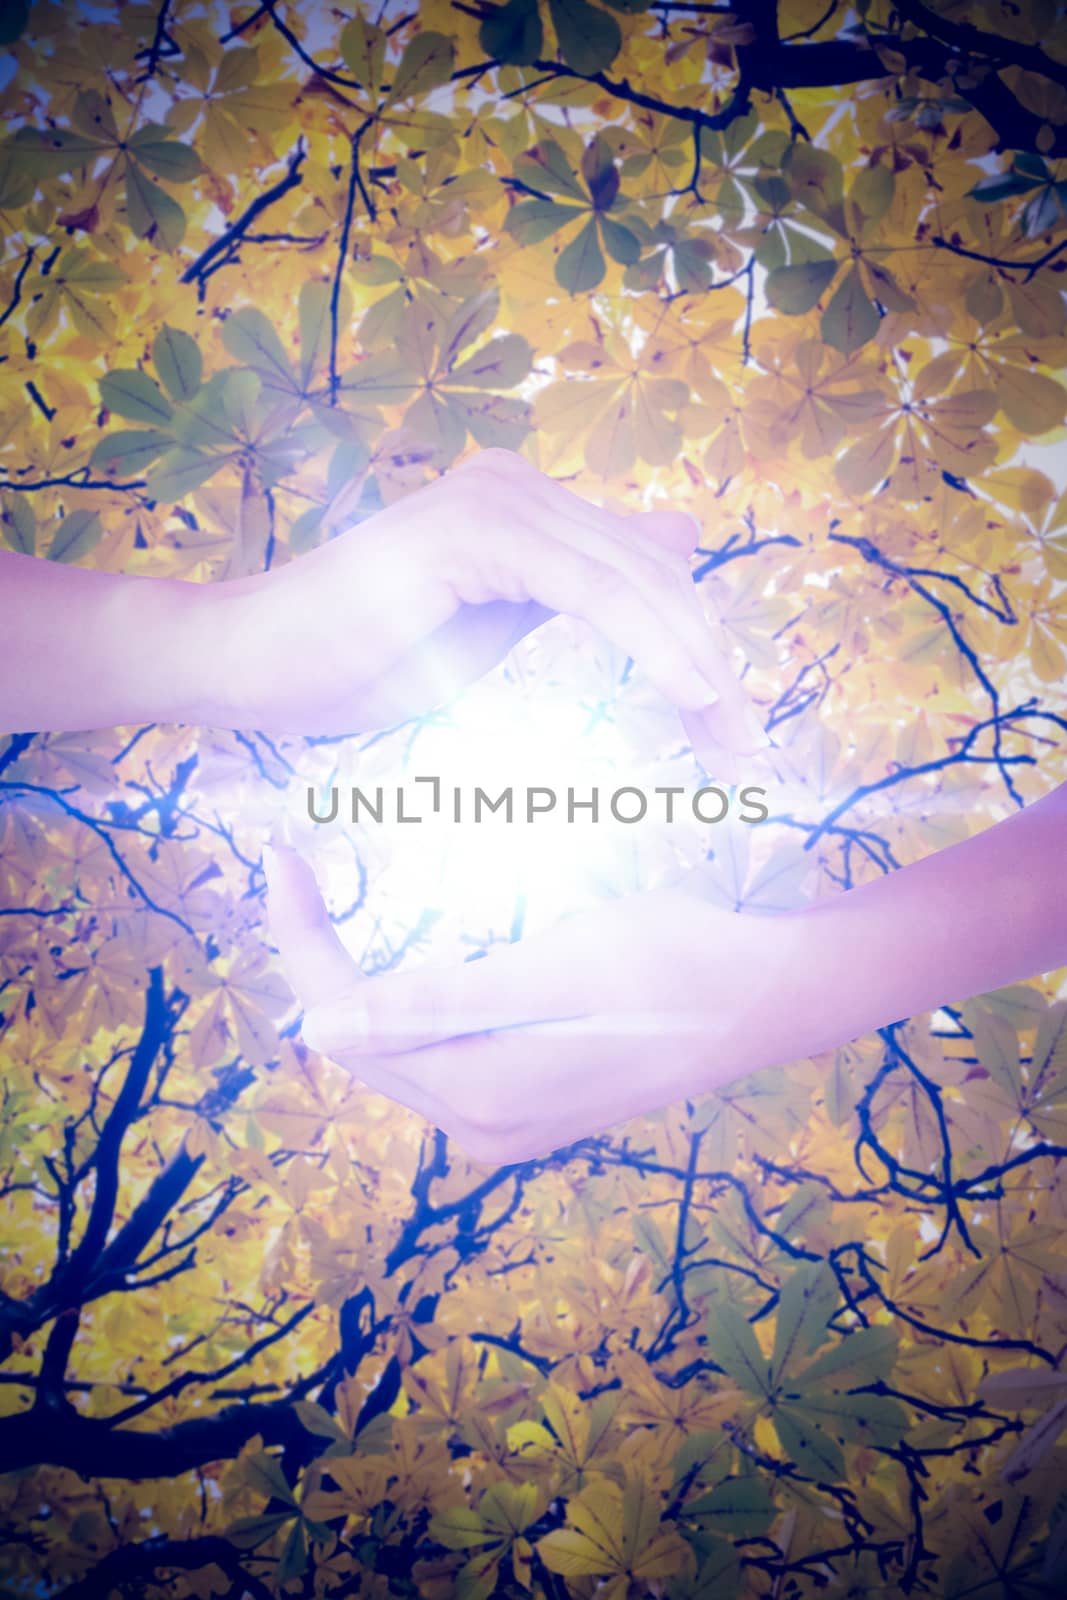 Composite image of hands showing by Wavebreakmedia